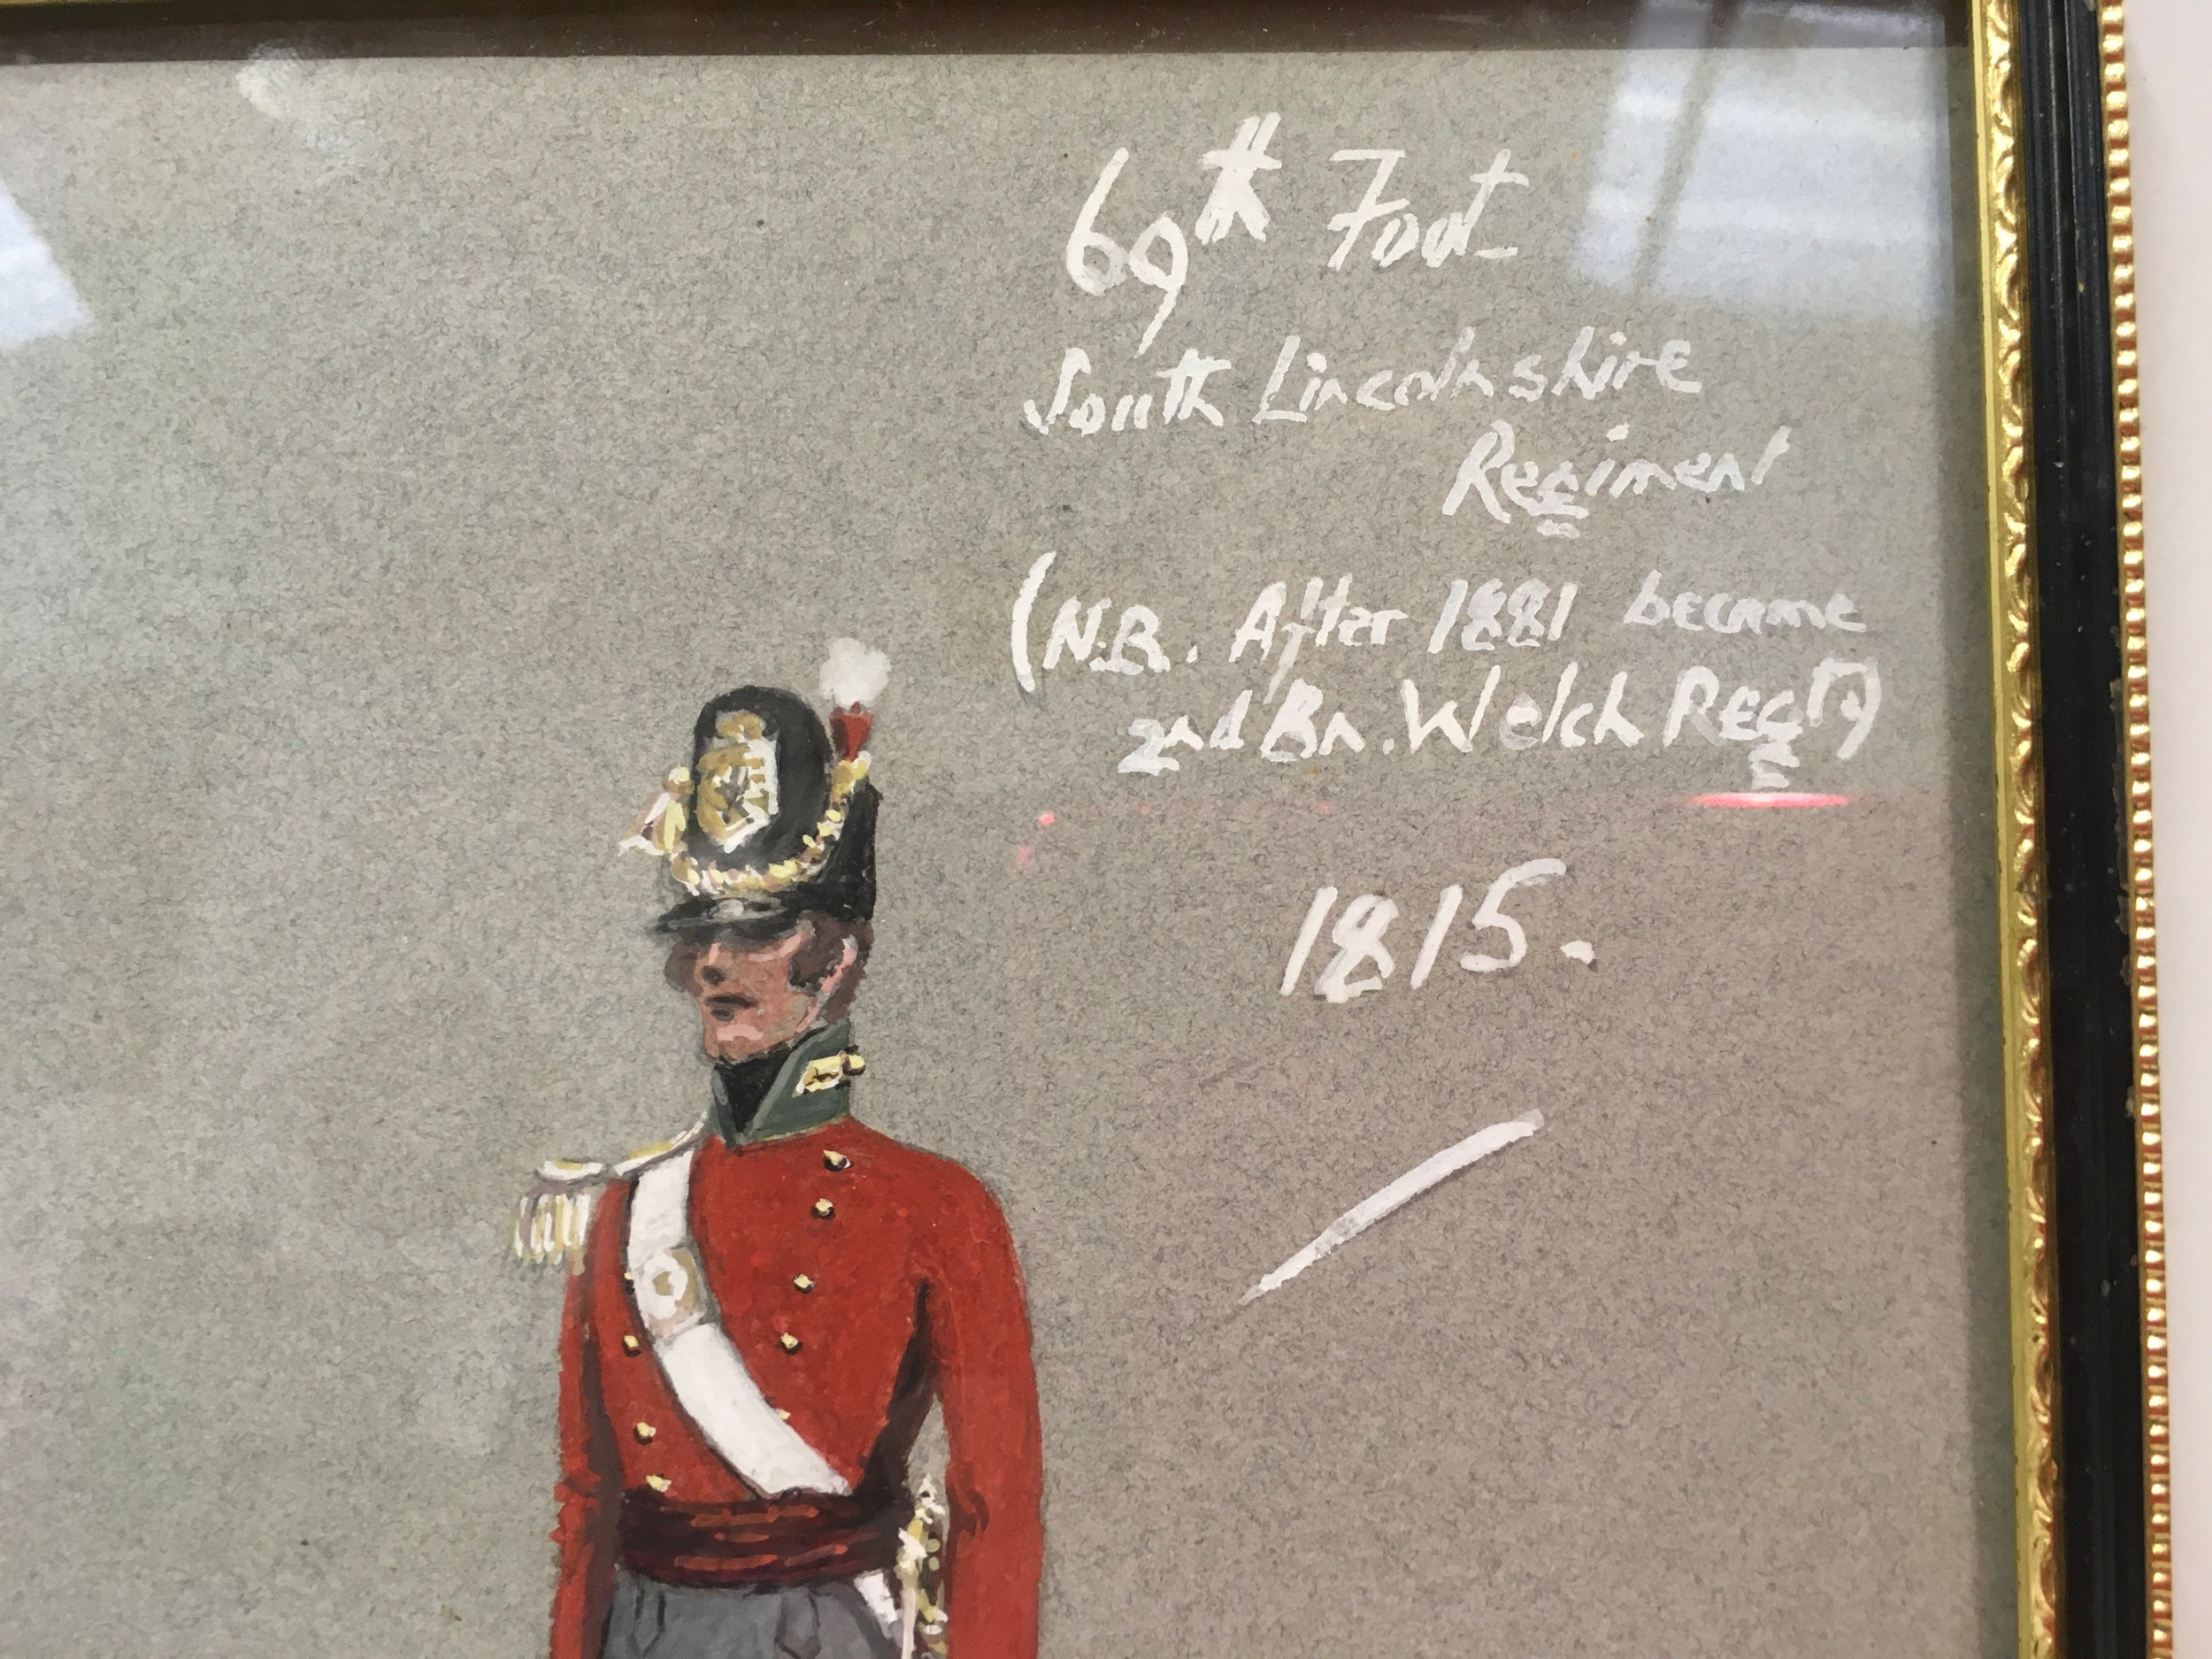 Original water colour of soldier in uniform 69th Foot, South Lincolnshire Regiment 1881-1815 - Image 5 of 5